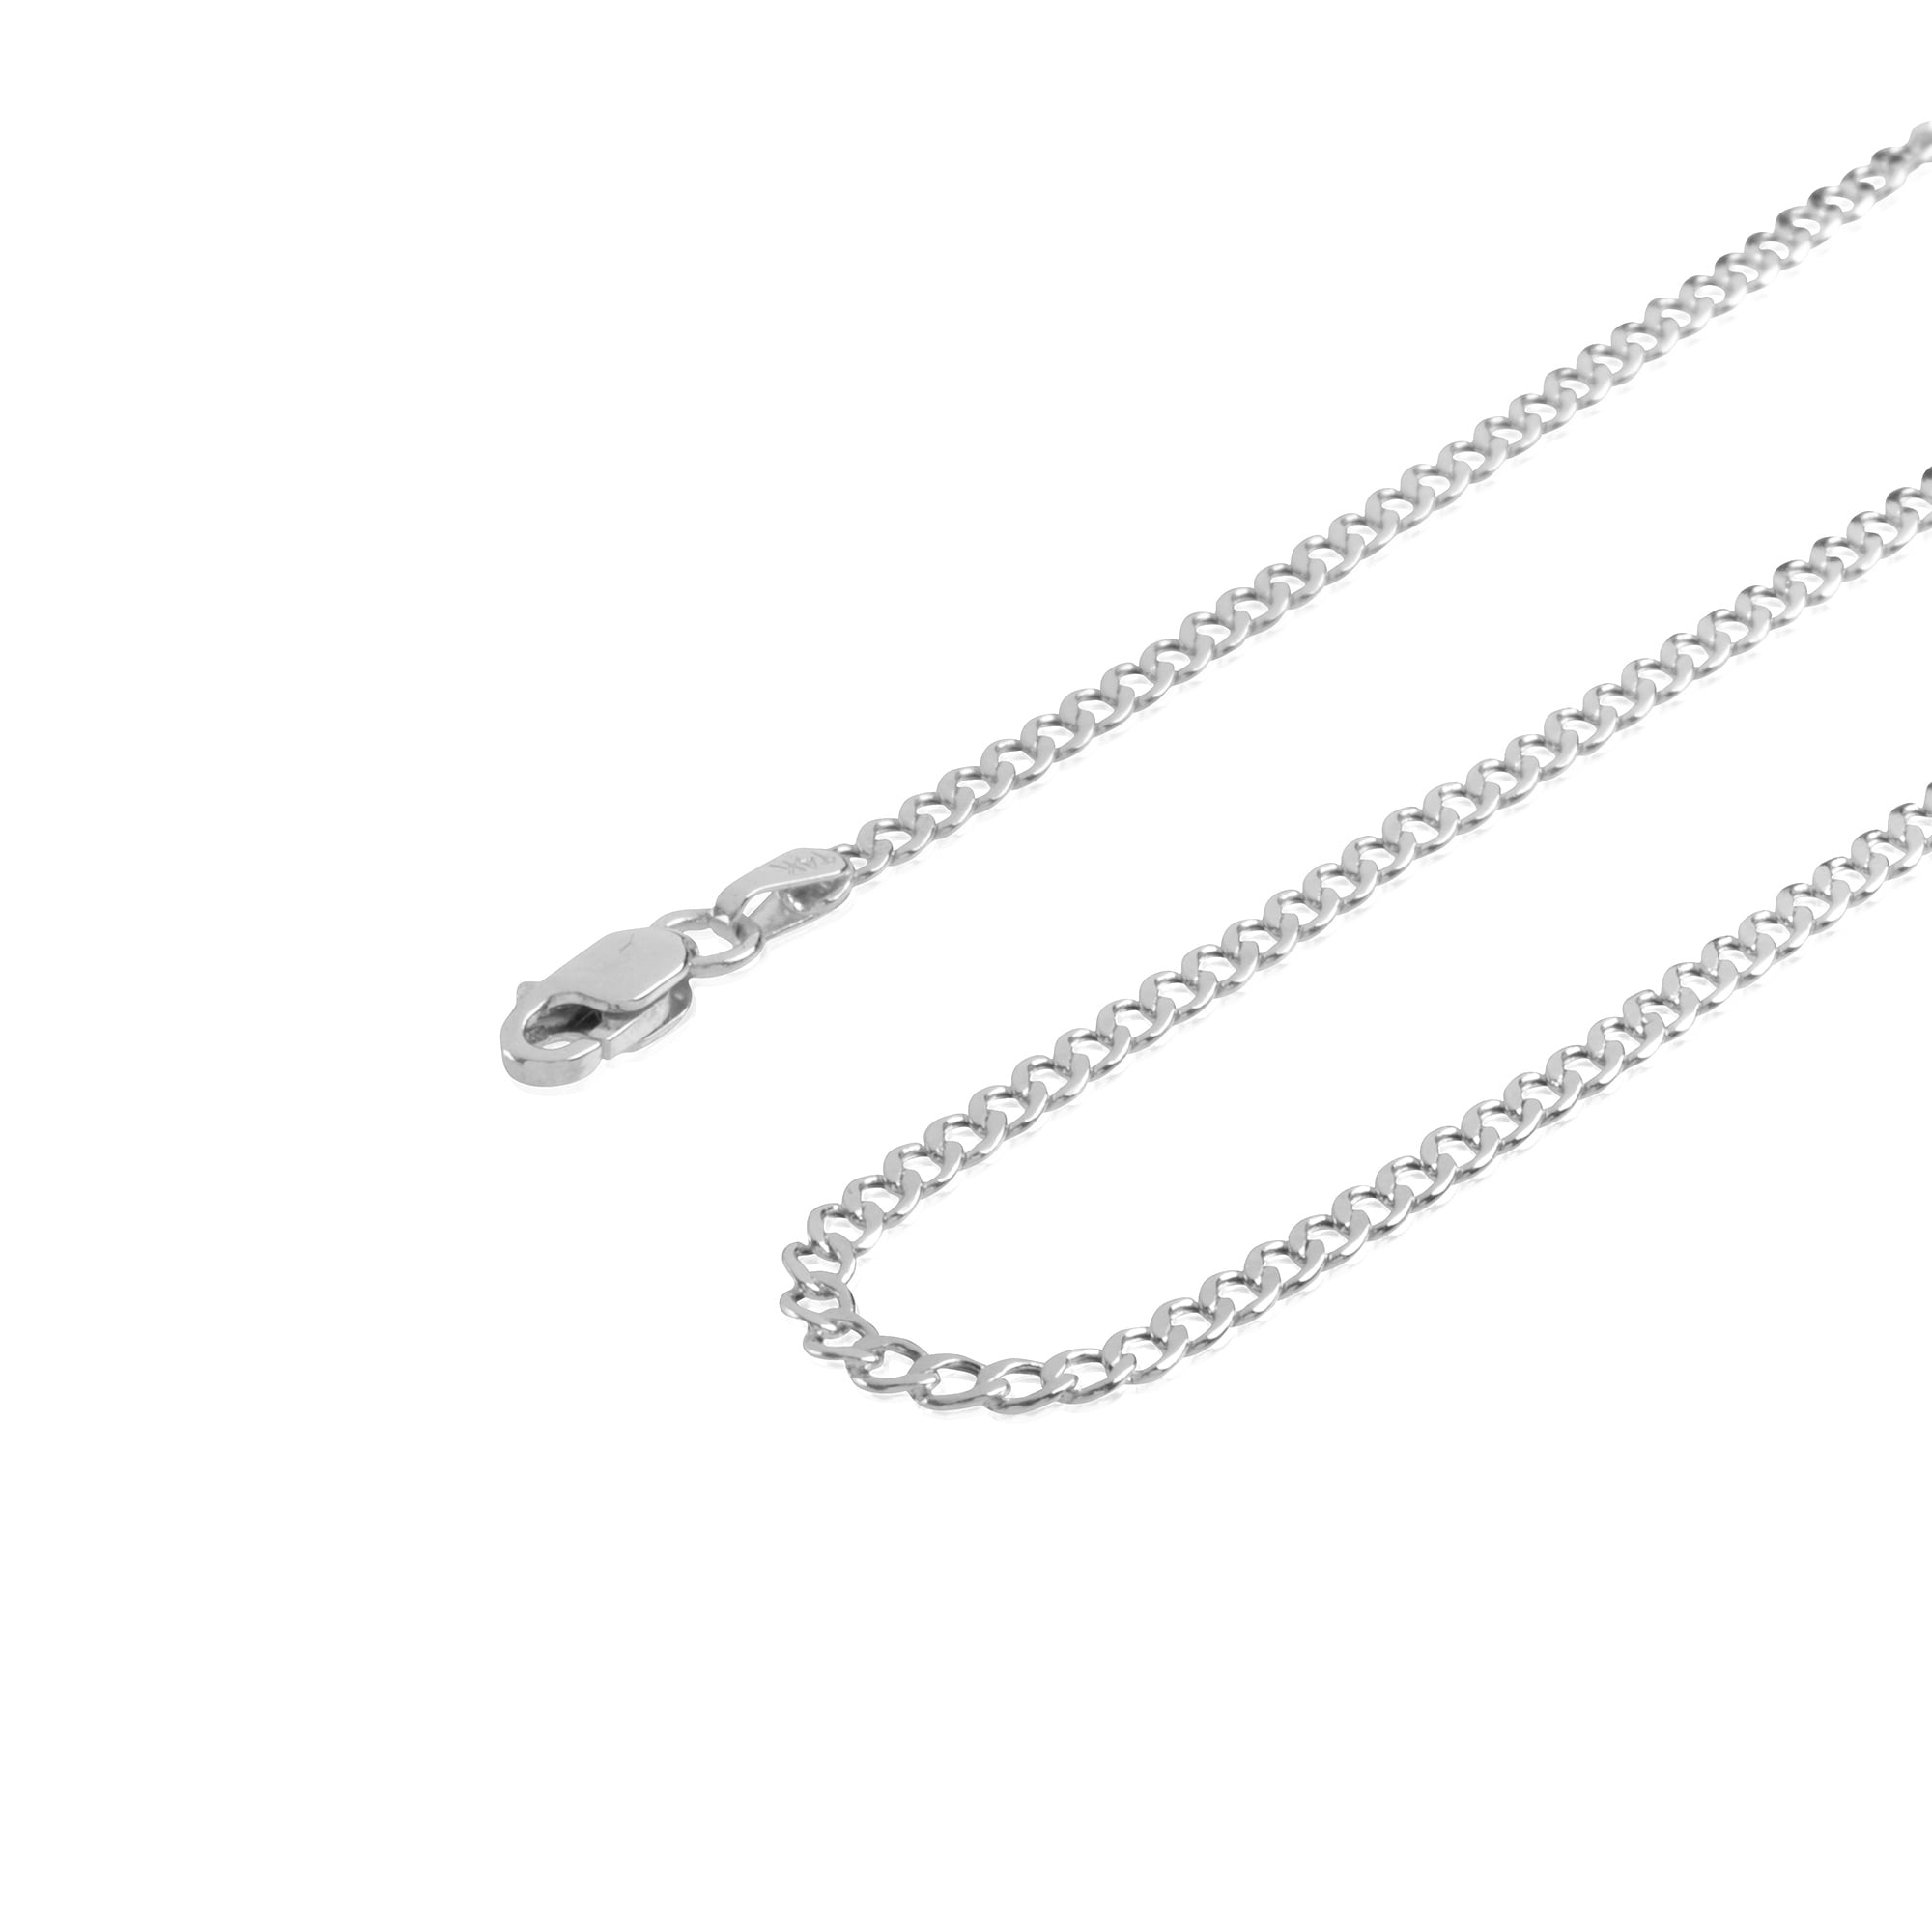 18 0.6 MM Flat Curb Necklace Gold Chain 14K White Gold